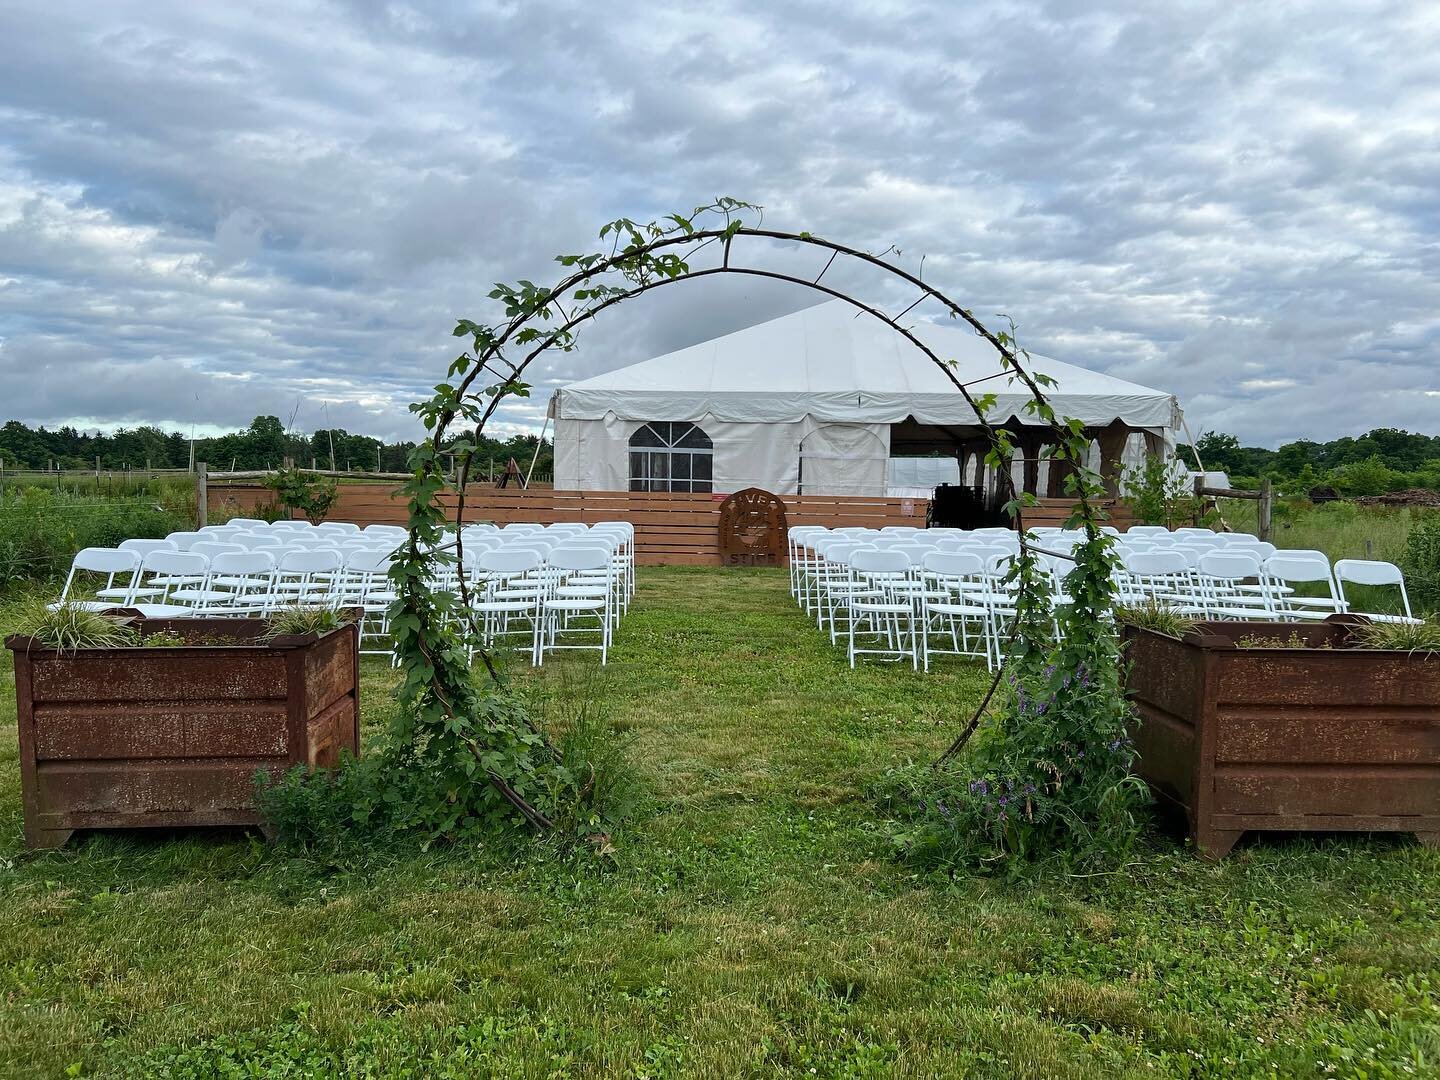 We are open! Don&rsquo;t be scared by all the cars&mdash;we have room for you! We are hosting a beautiful wedding in our event tent.